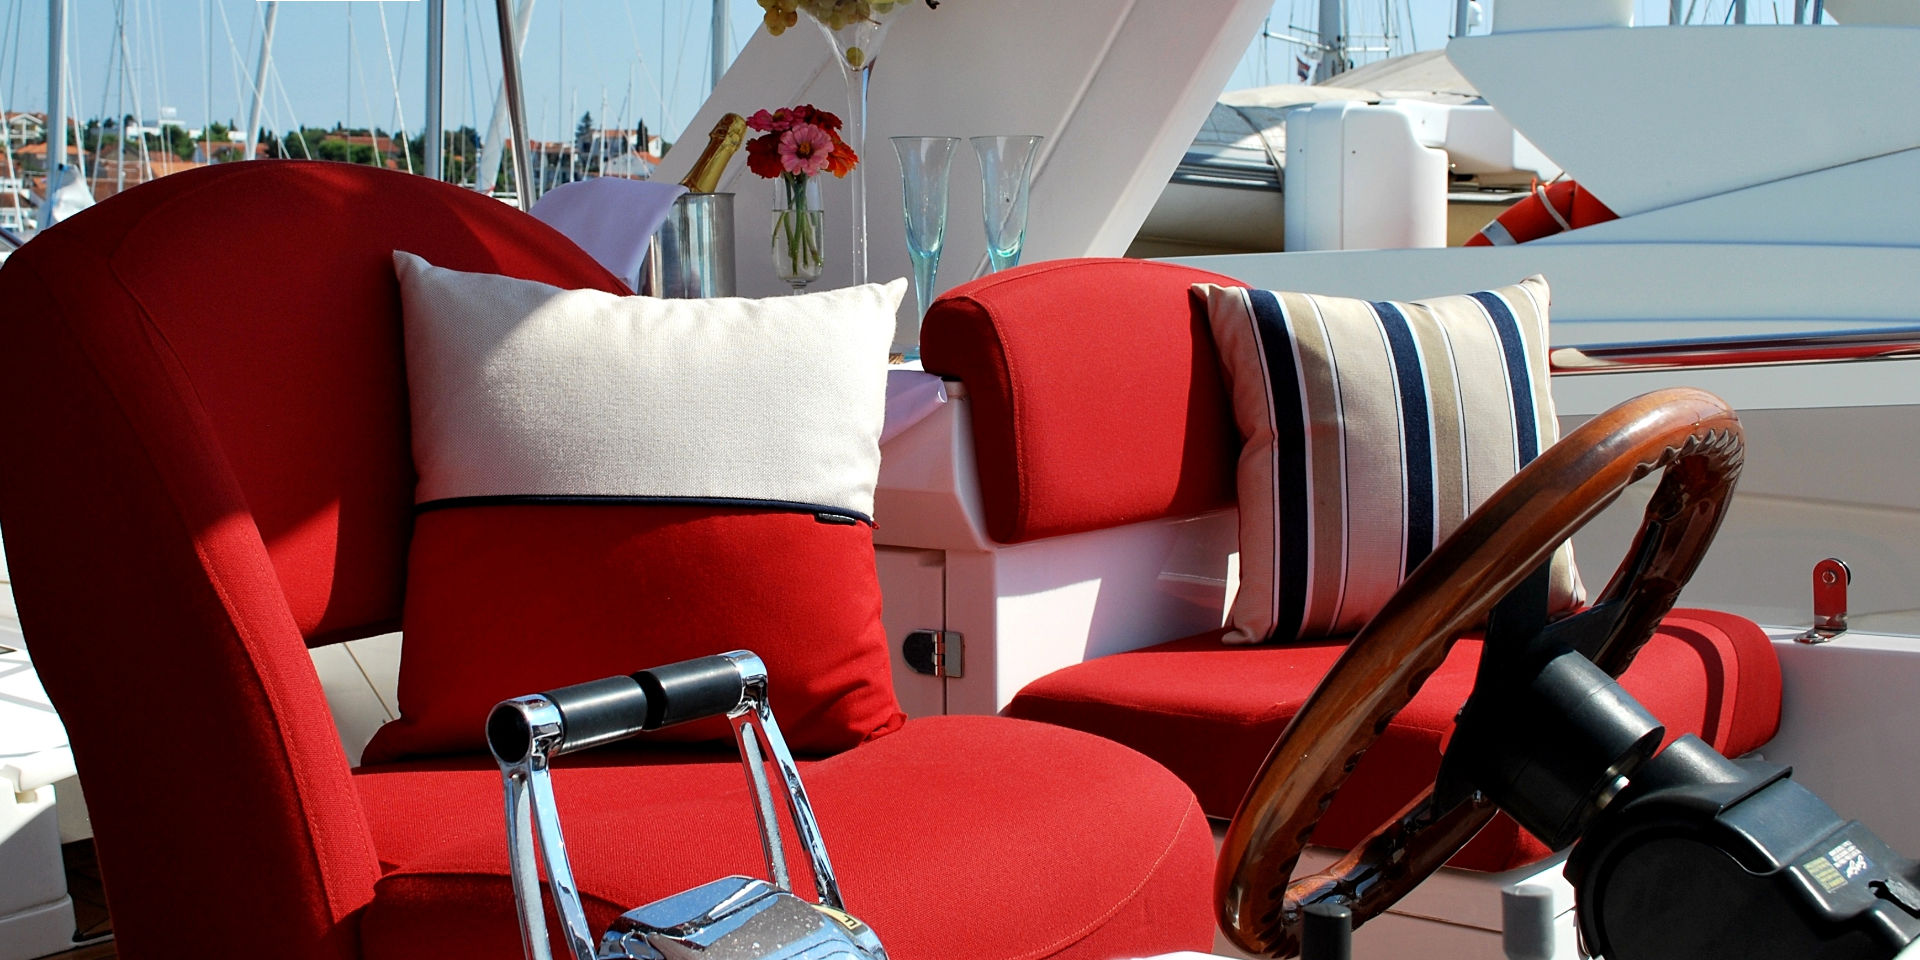 Sealine T-60 yacht exterior, newly reupholstered helm seats in bold red colour with complimentary Frey luxury pillows in striped fabric.